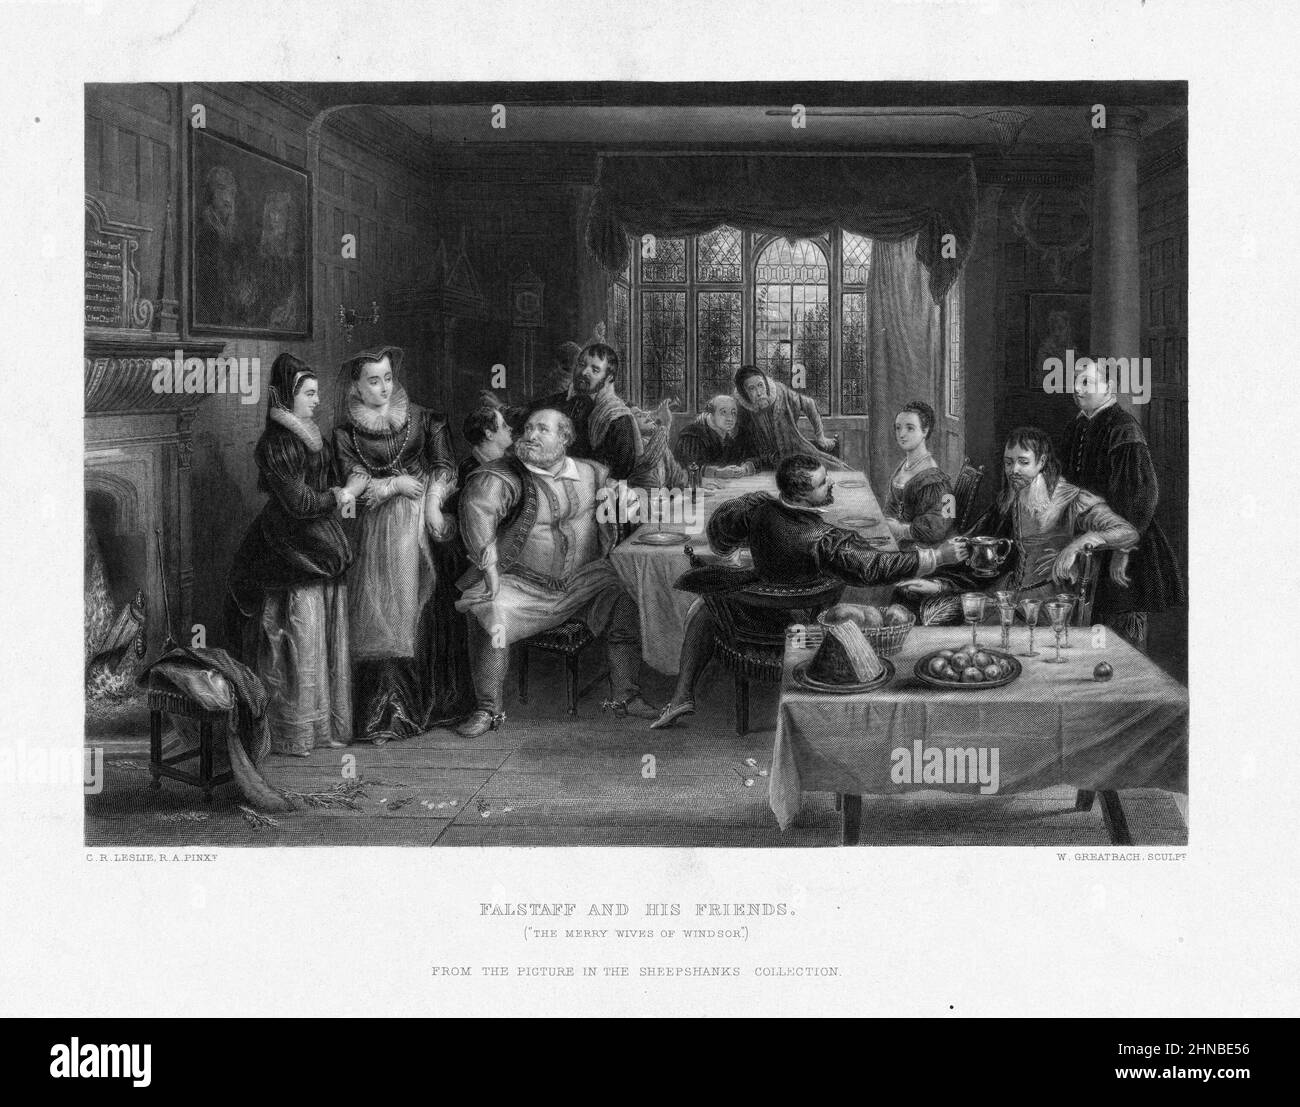 Falstaff and his friends, from Shakespeare's The Merry Wives of Windsor Stock Photo